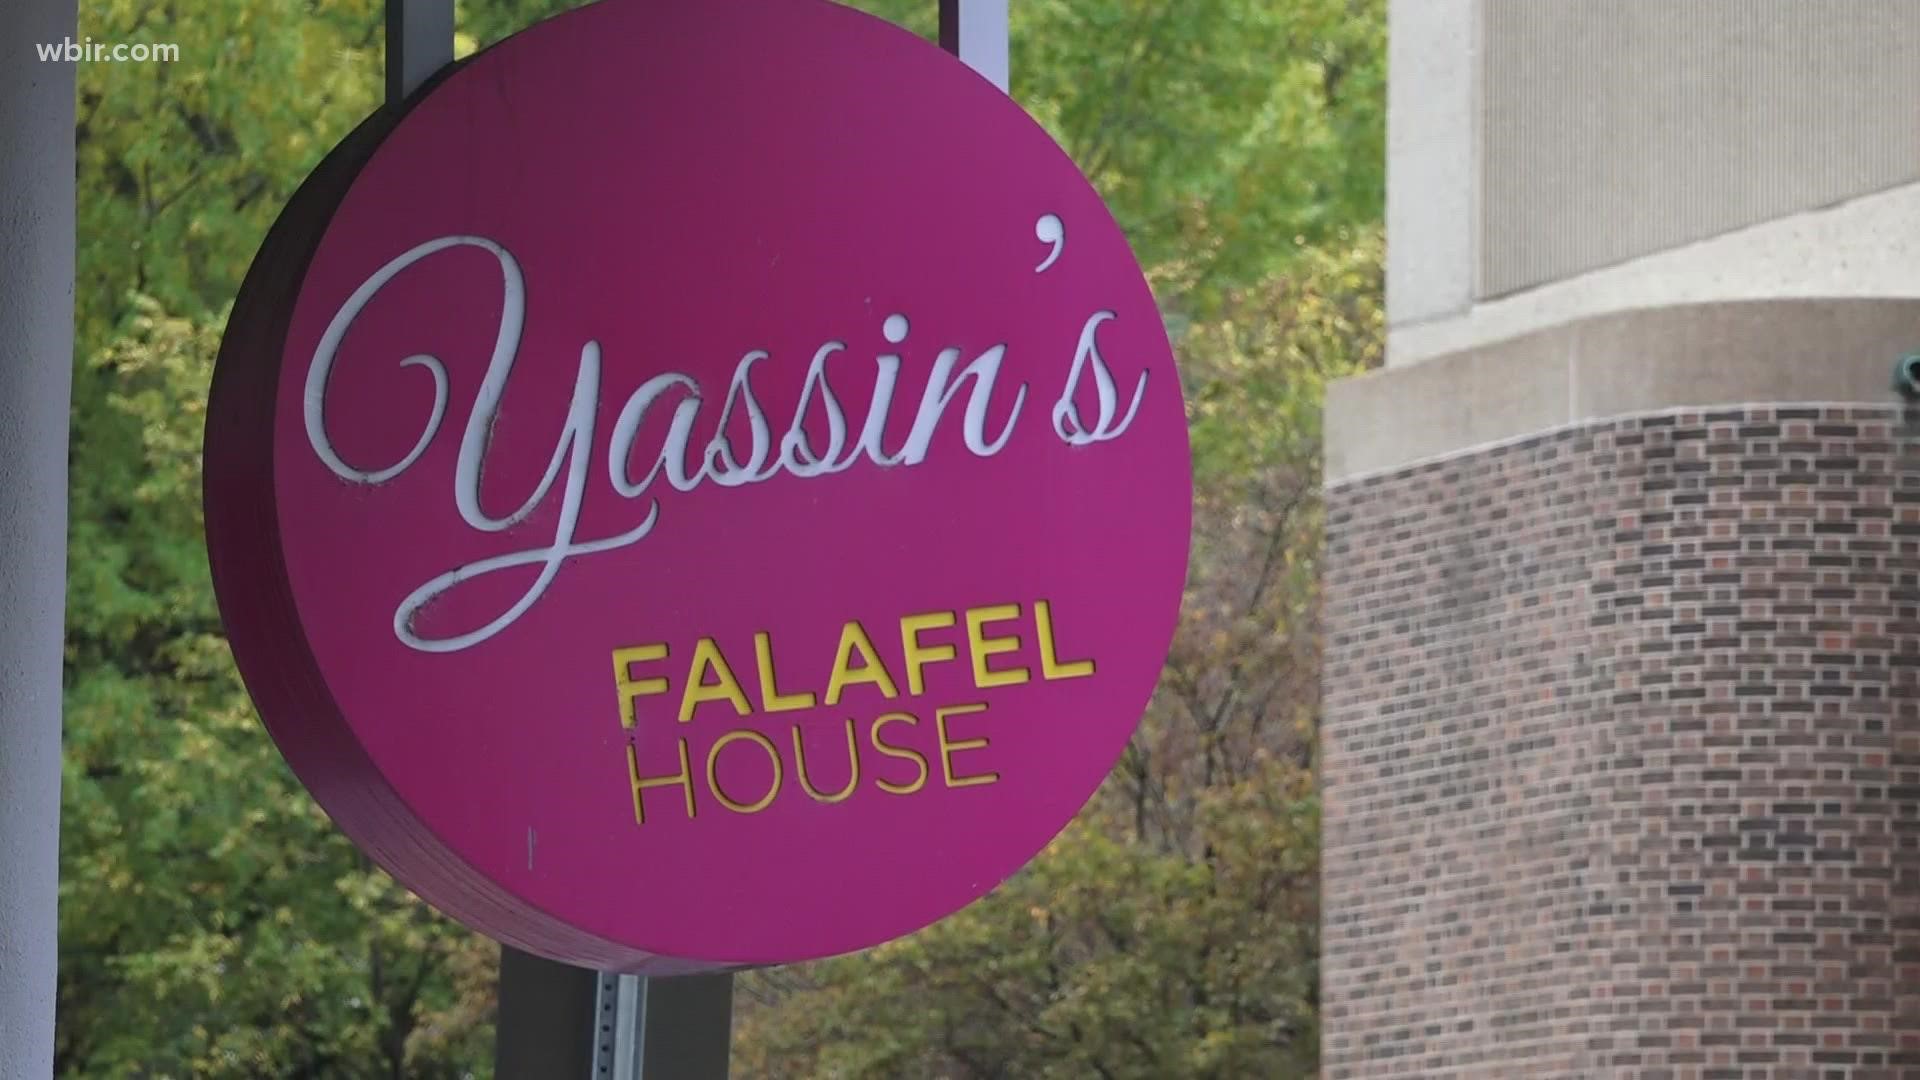 The "nicest place in America" has its two locations in Knoxville. Yassin's Falafel House is a favorite for it's delicious Middle Eastern cuisine and inclusive staff.